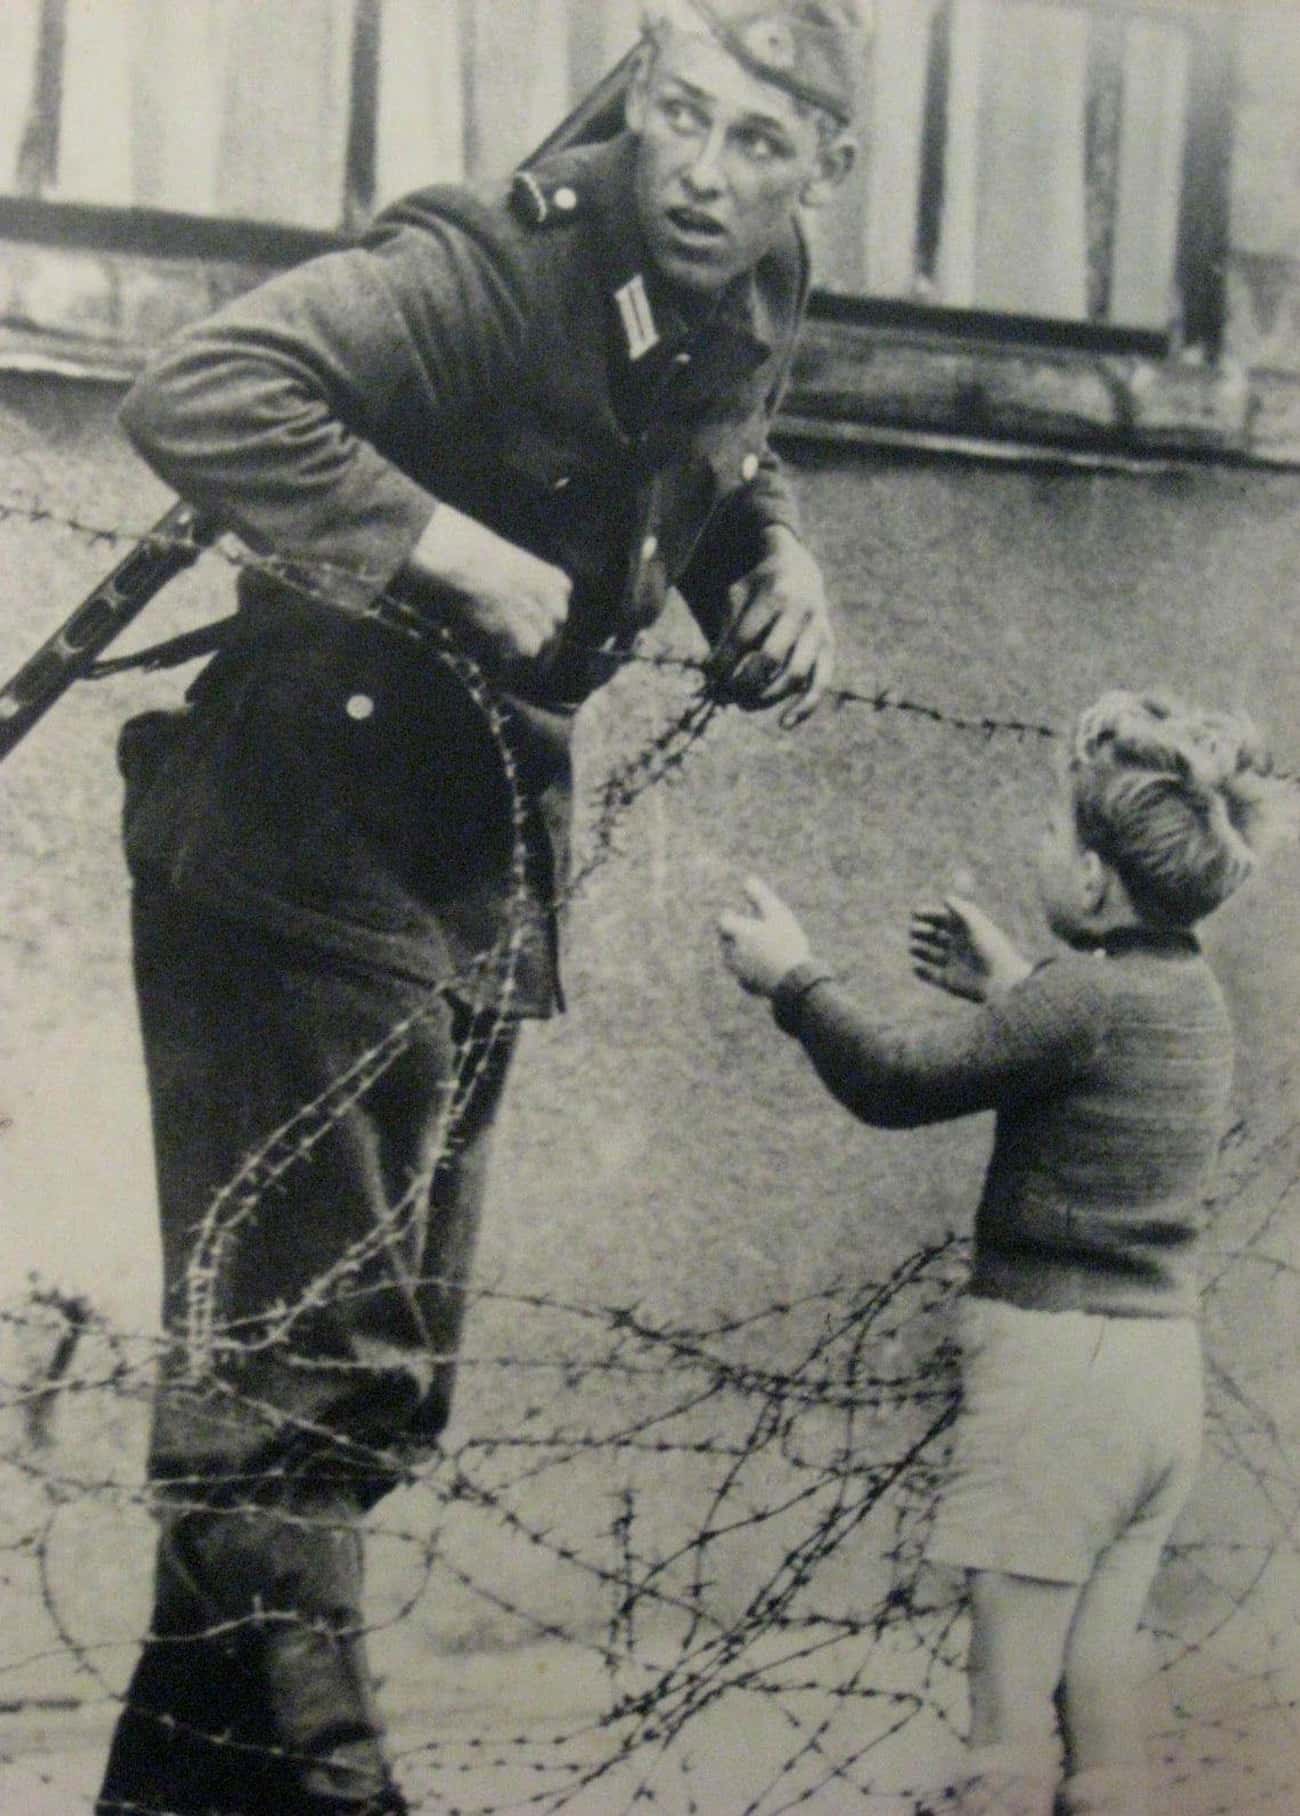 One East German Soldier Flouted His Orders To Reunite A Little Boy With His Family